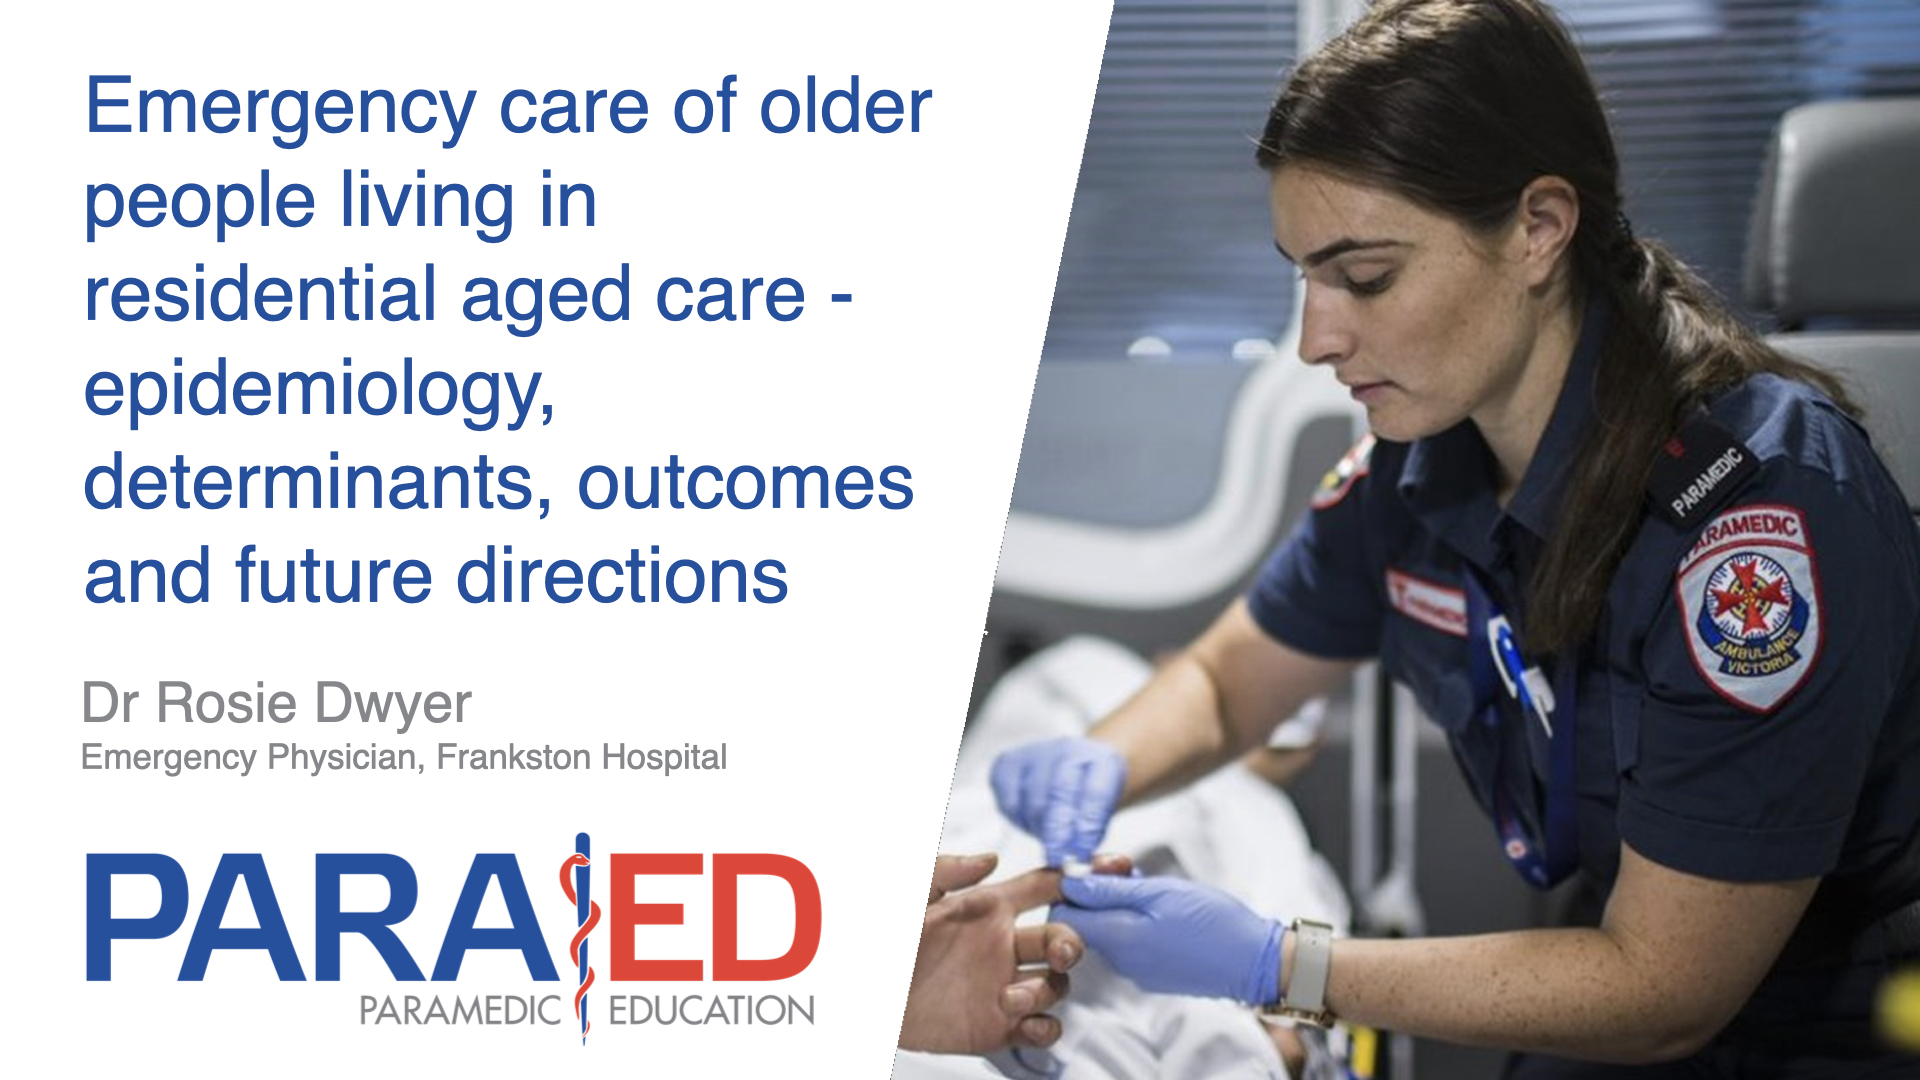 Emergency care of older people living in residential aged care - epidemiology, determinants, outcomes and future directions